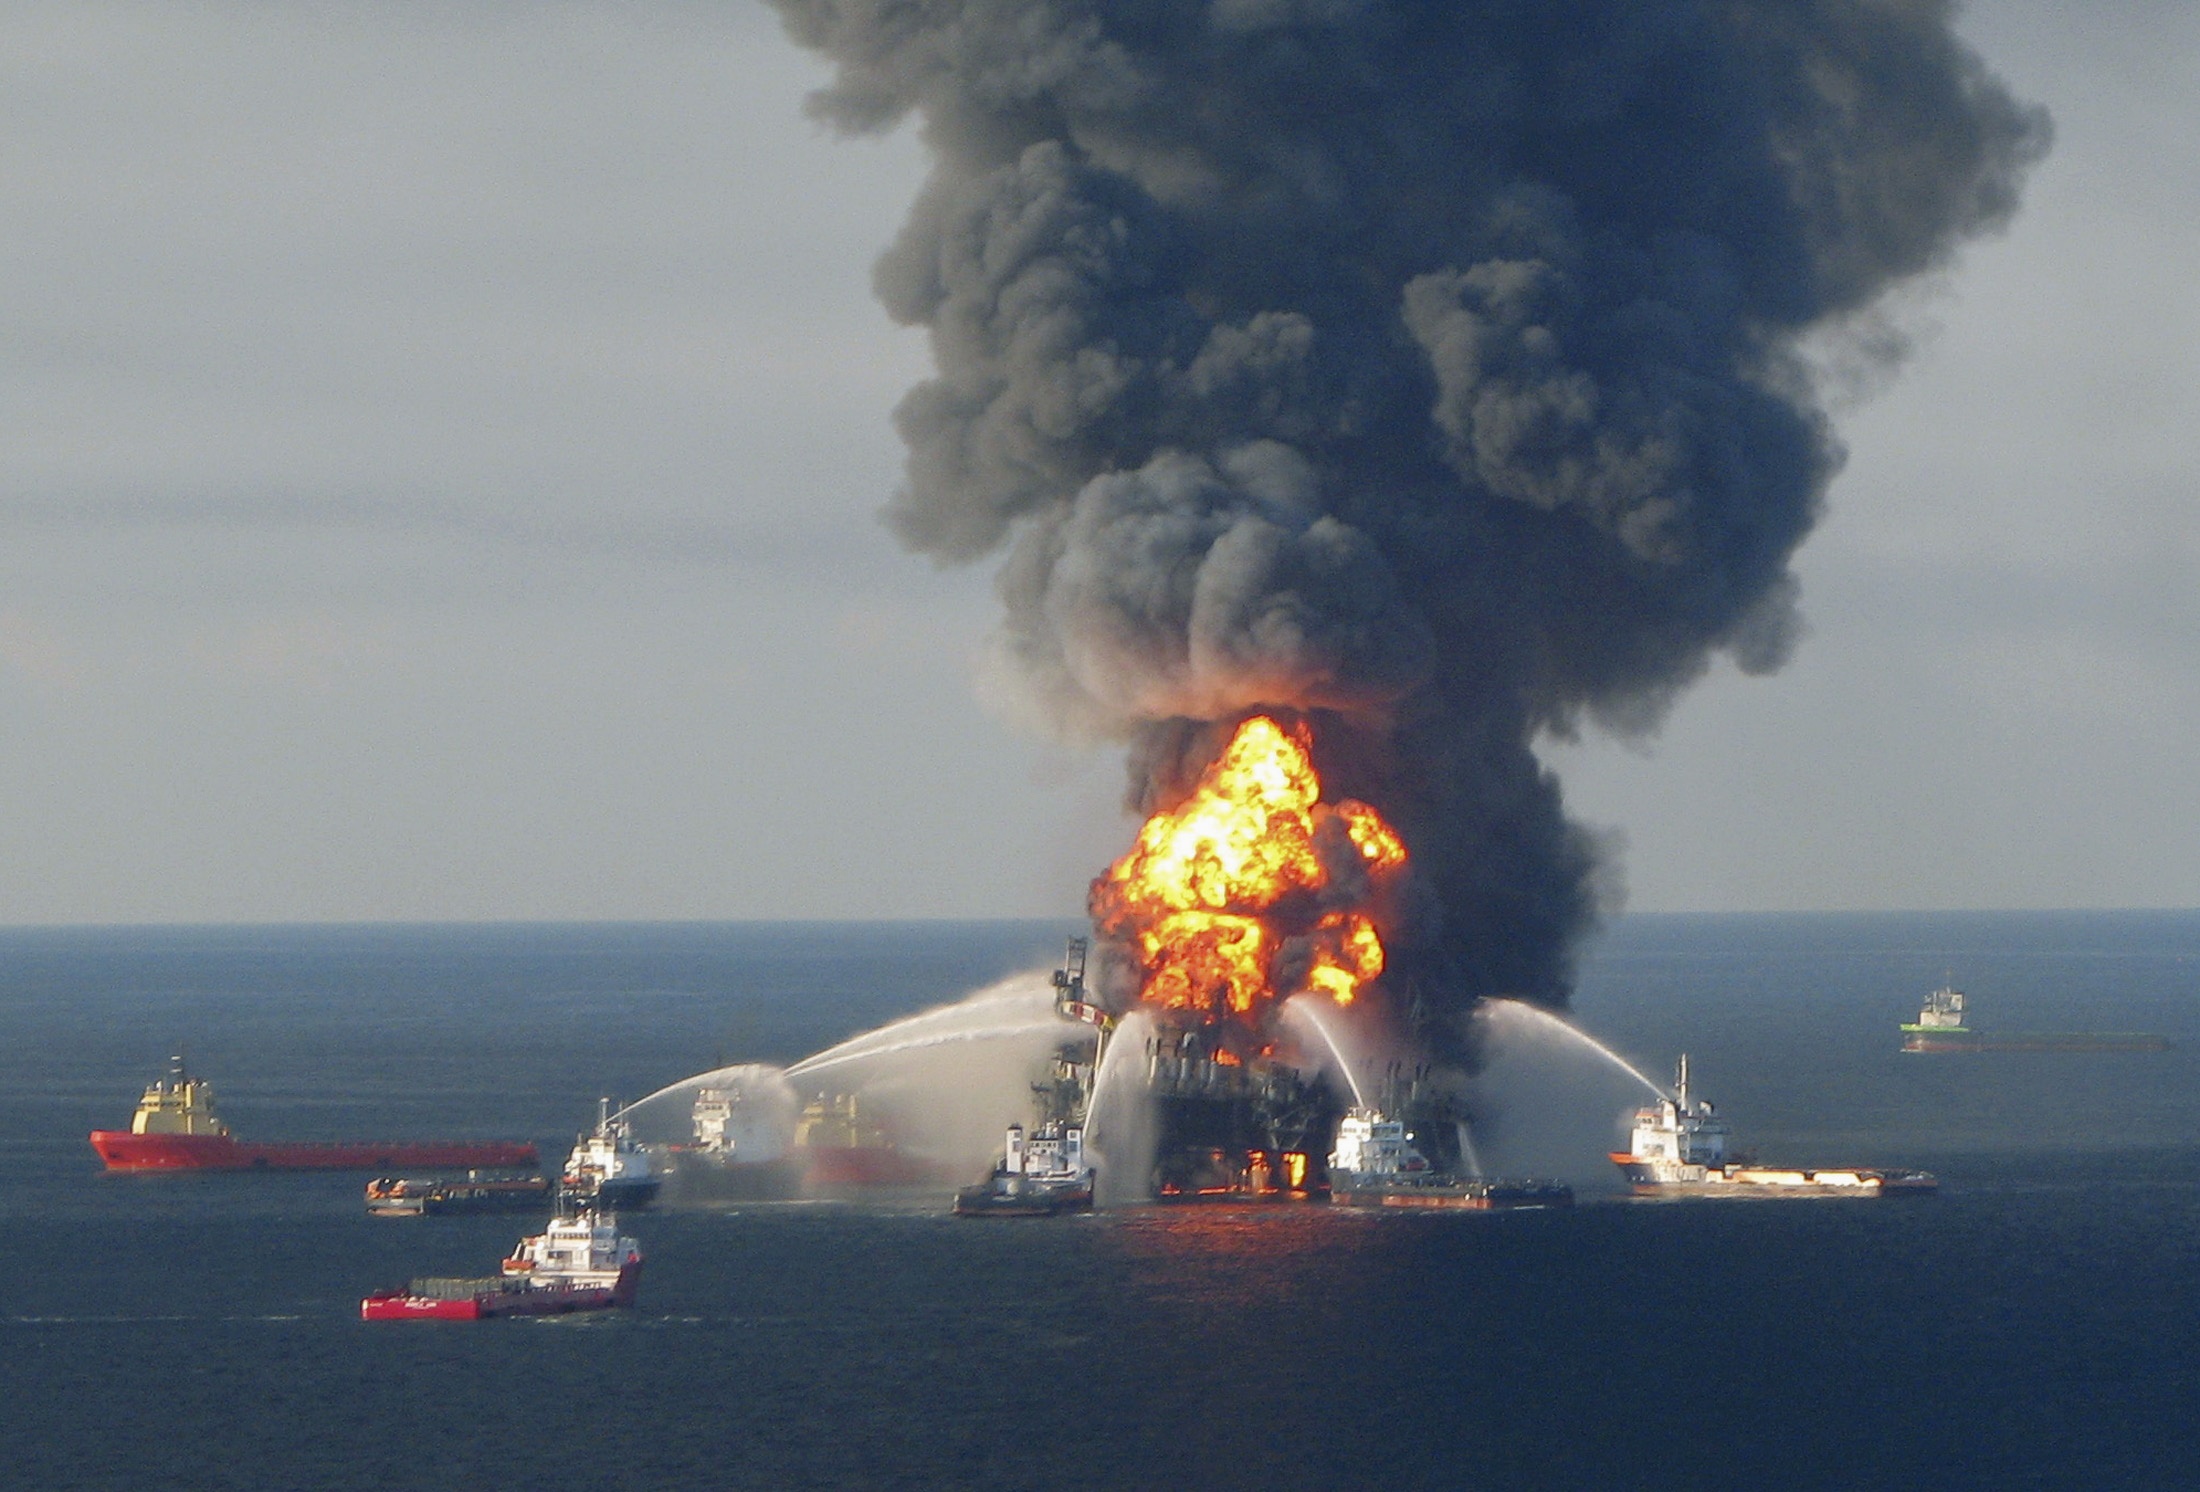 The Deepwater Horizon oil spill claimed 11 lives and was the worst oil spill in US history. Photo: Reuters